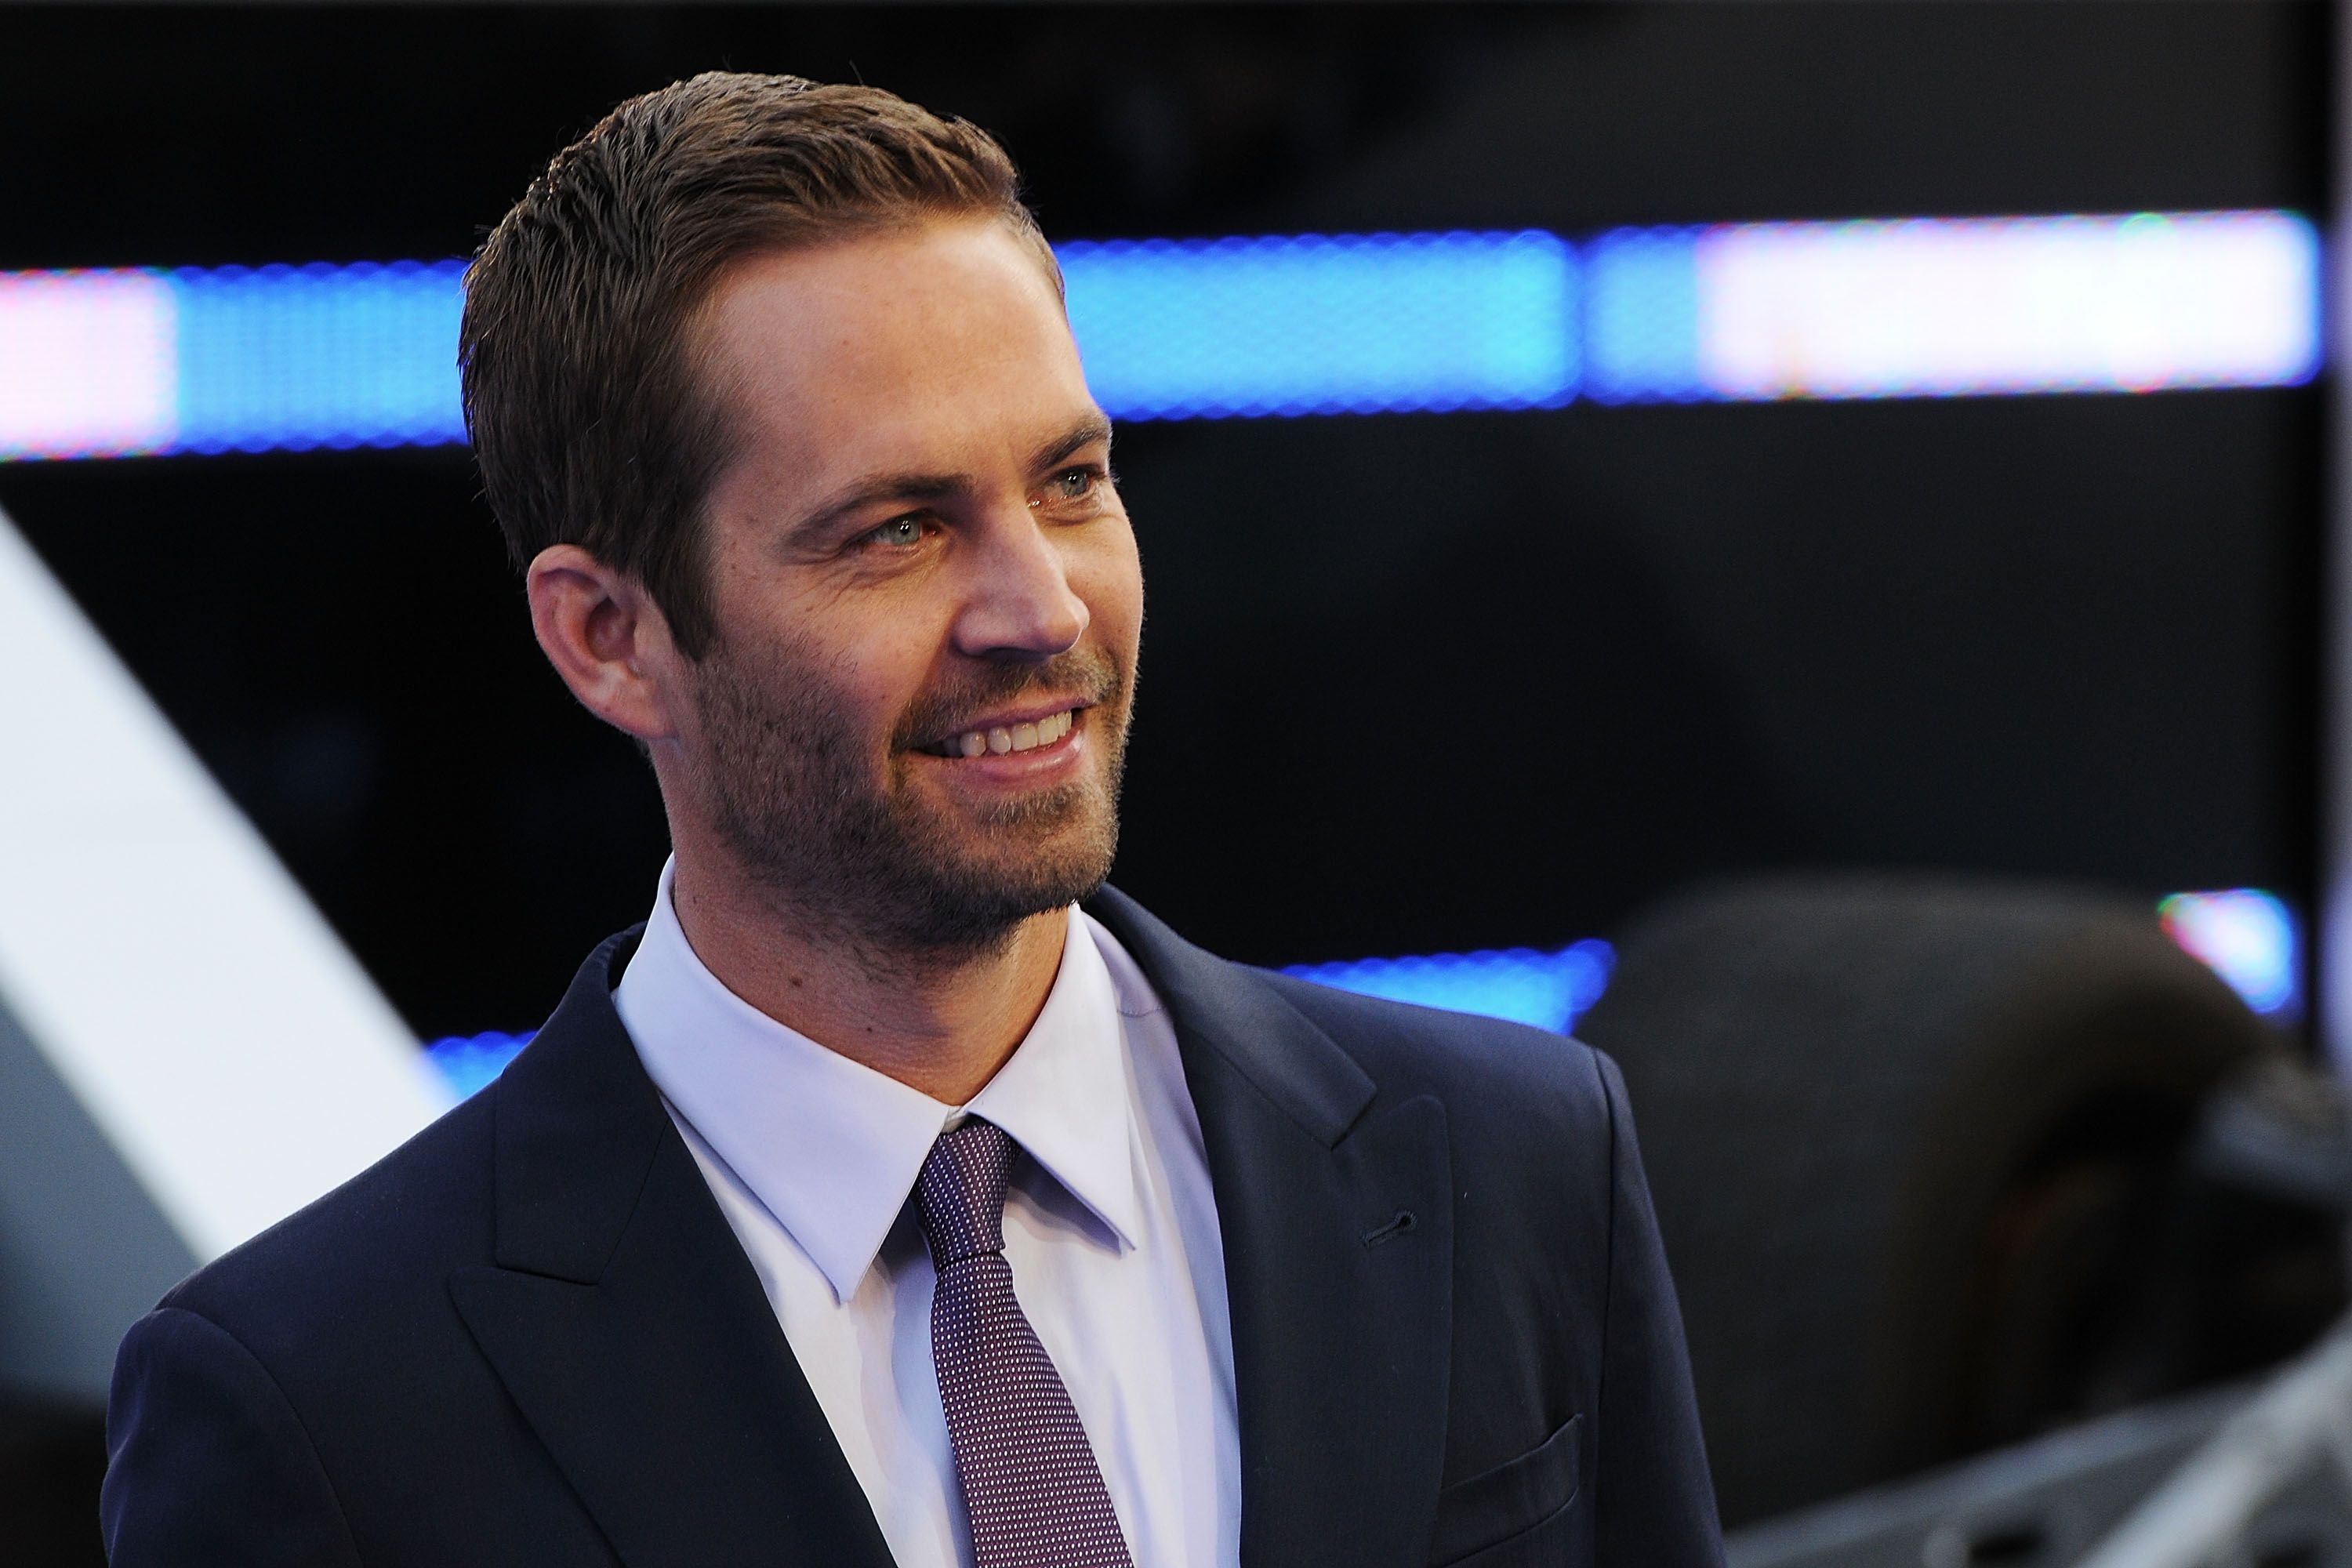 Paul Walker at the World Premiere of 'Fast & Furious 6' at Empire Leicester Square on May 7, 2013 | Photo: Getty Images